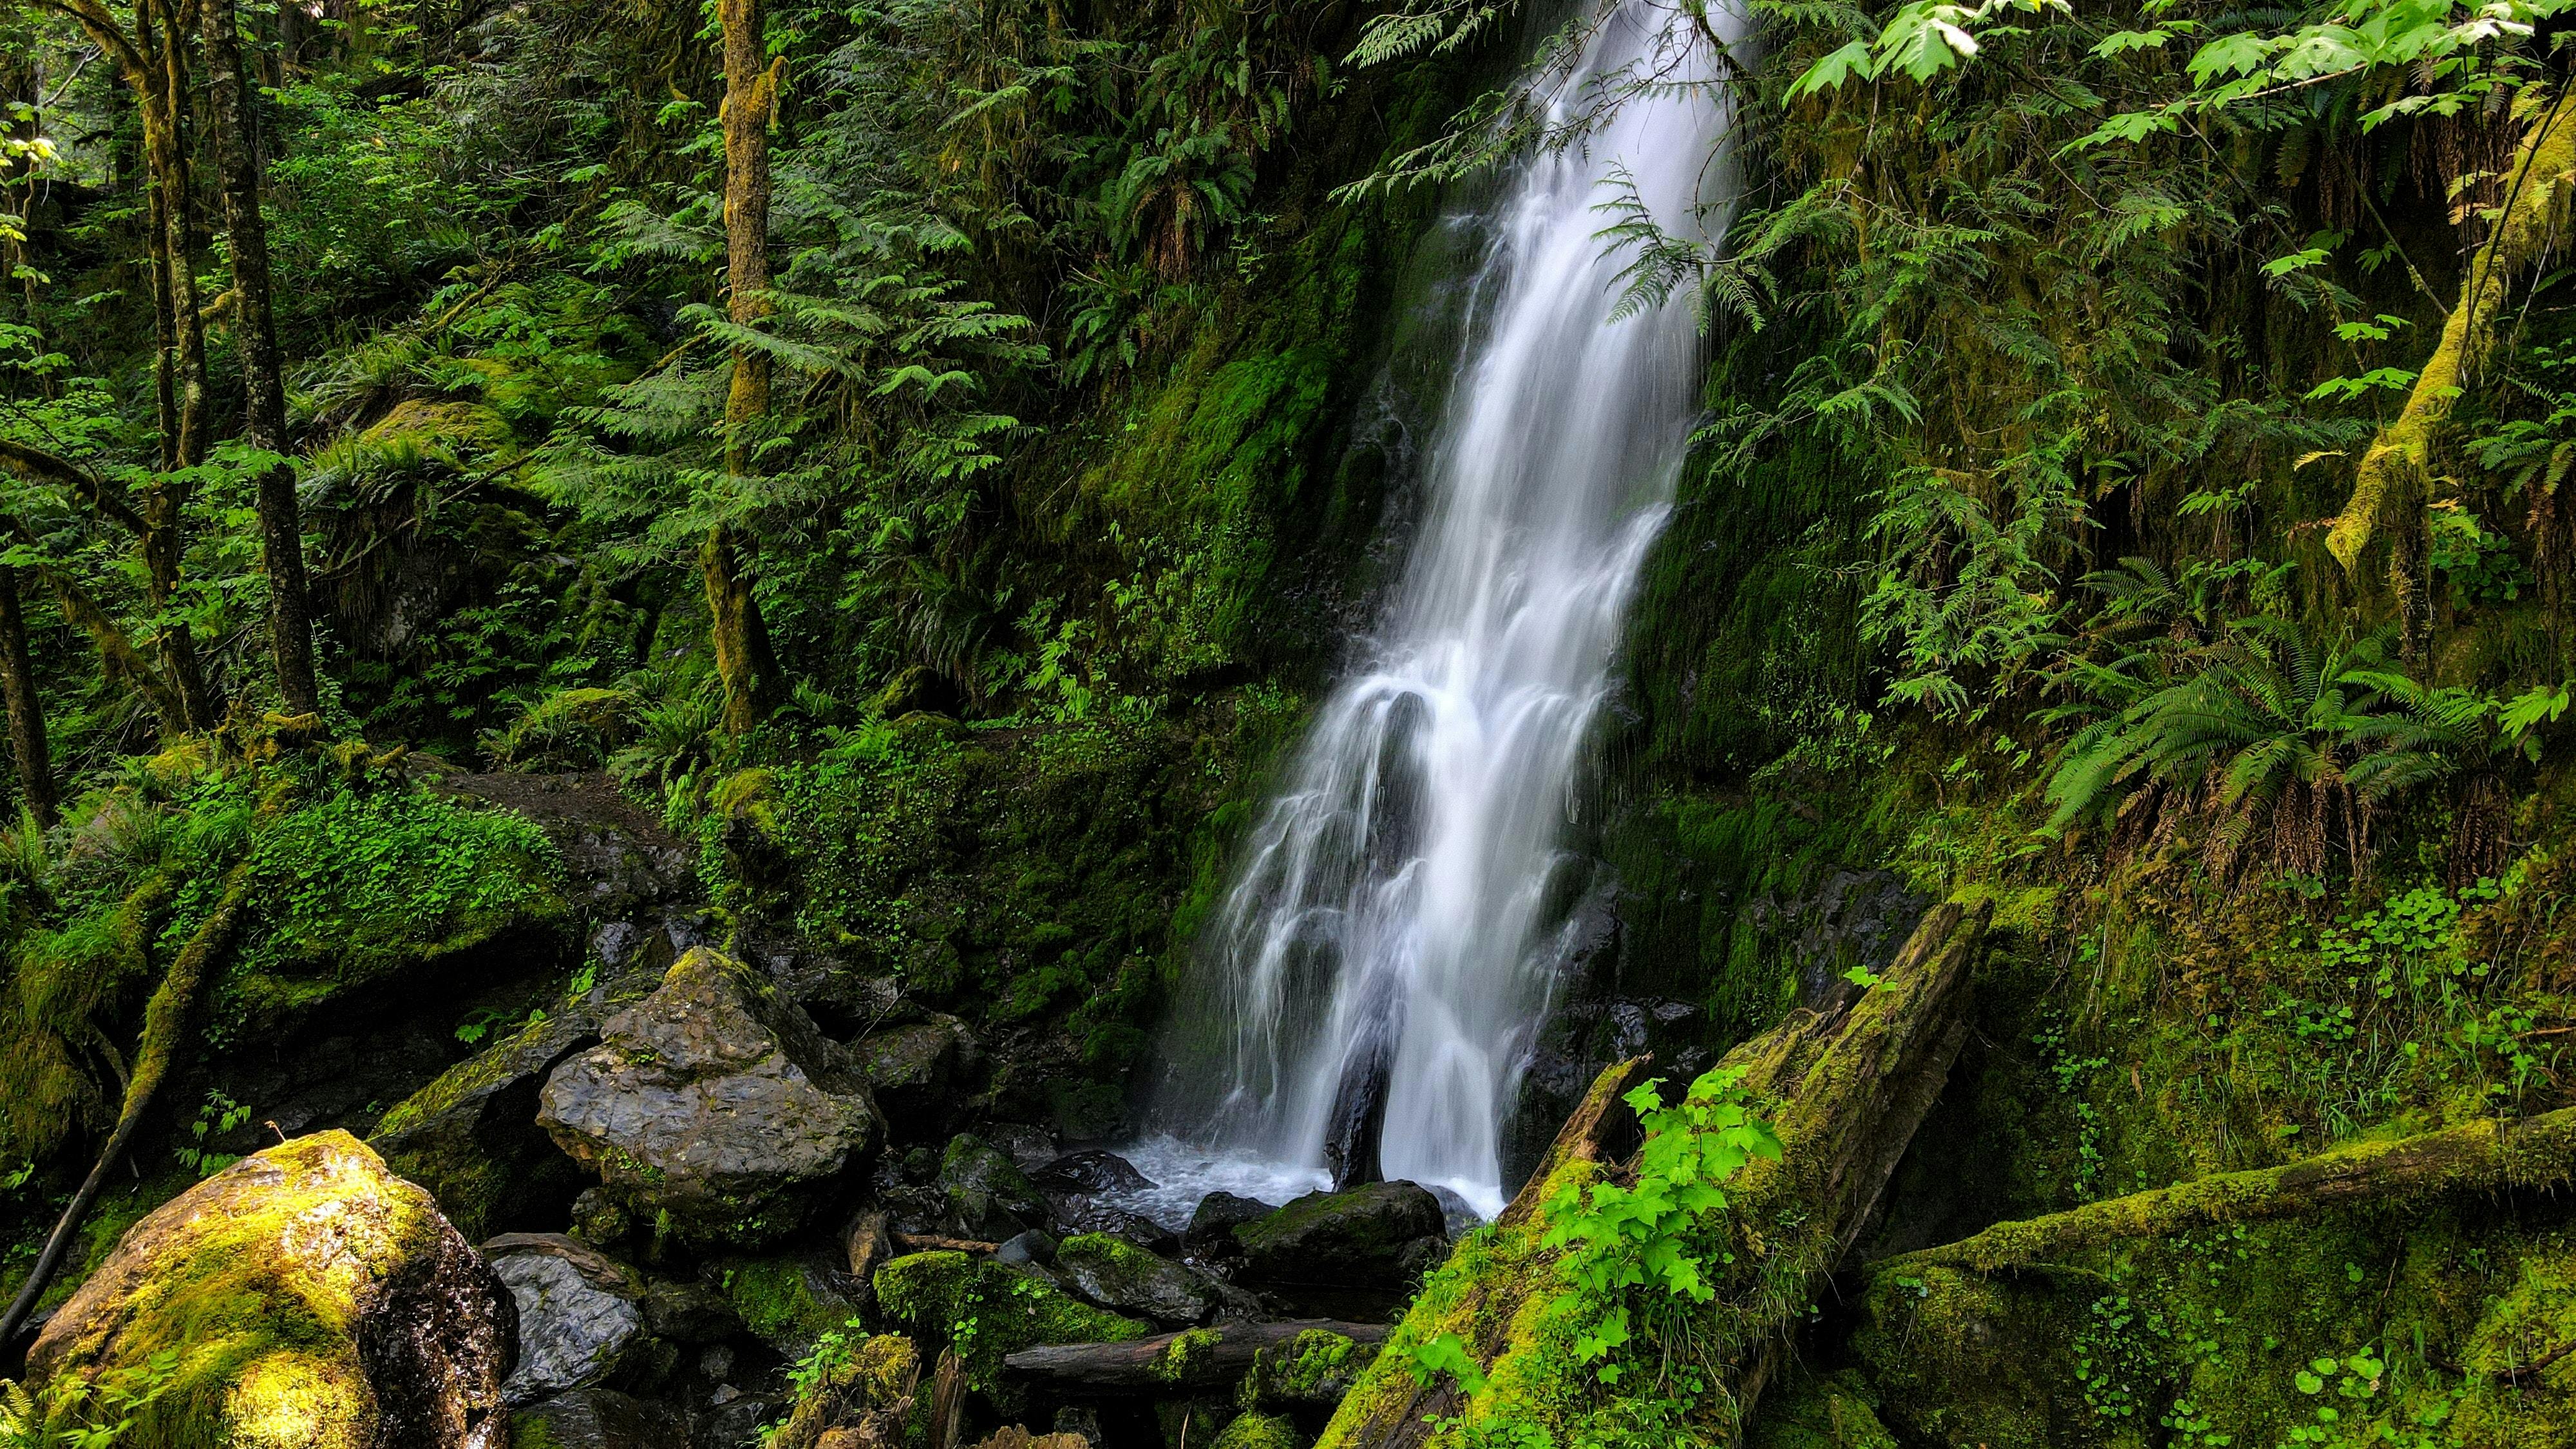 A waterfall comes down on moss-covered boulders and logs. The scene is full of ferns and moss. 